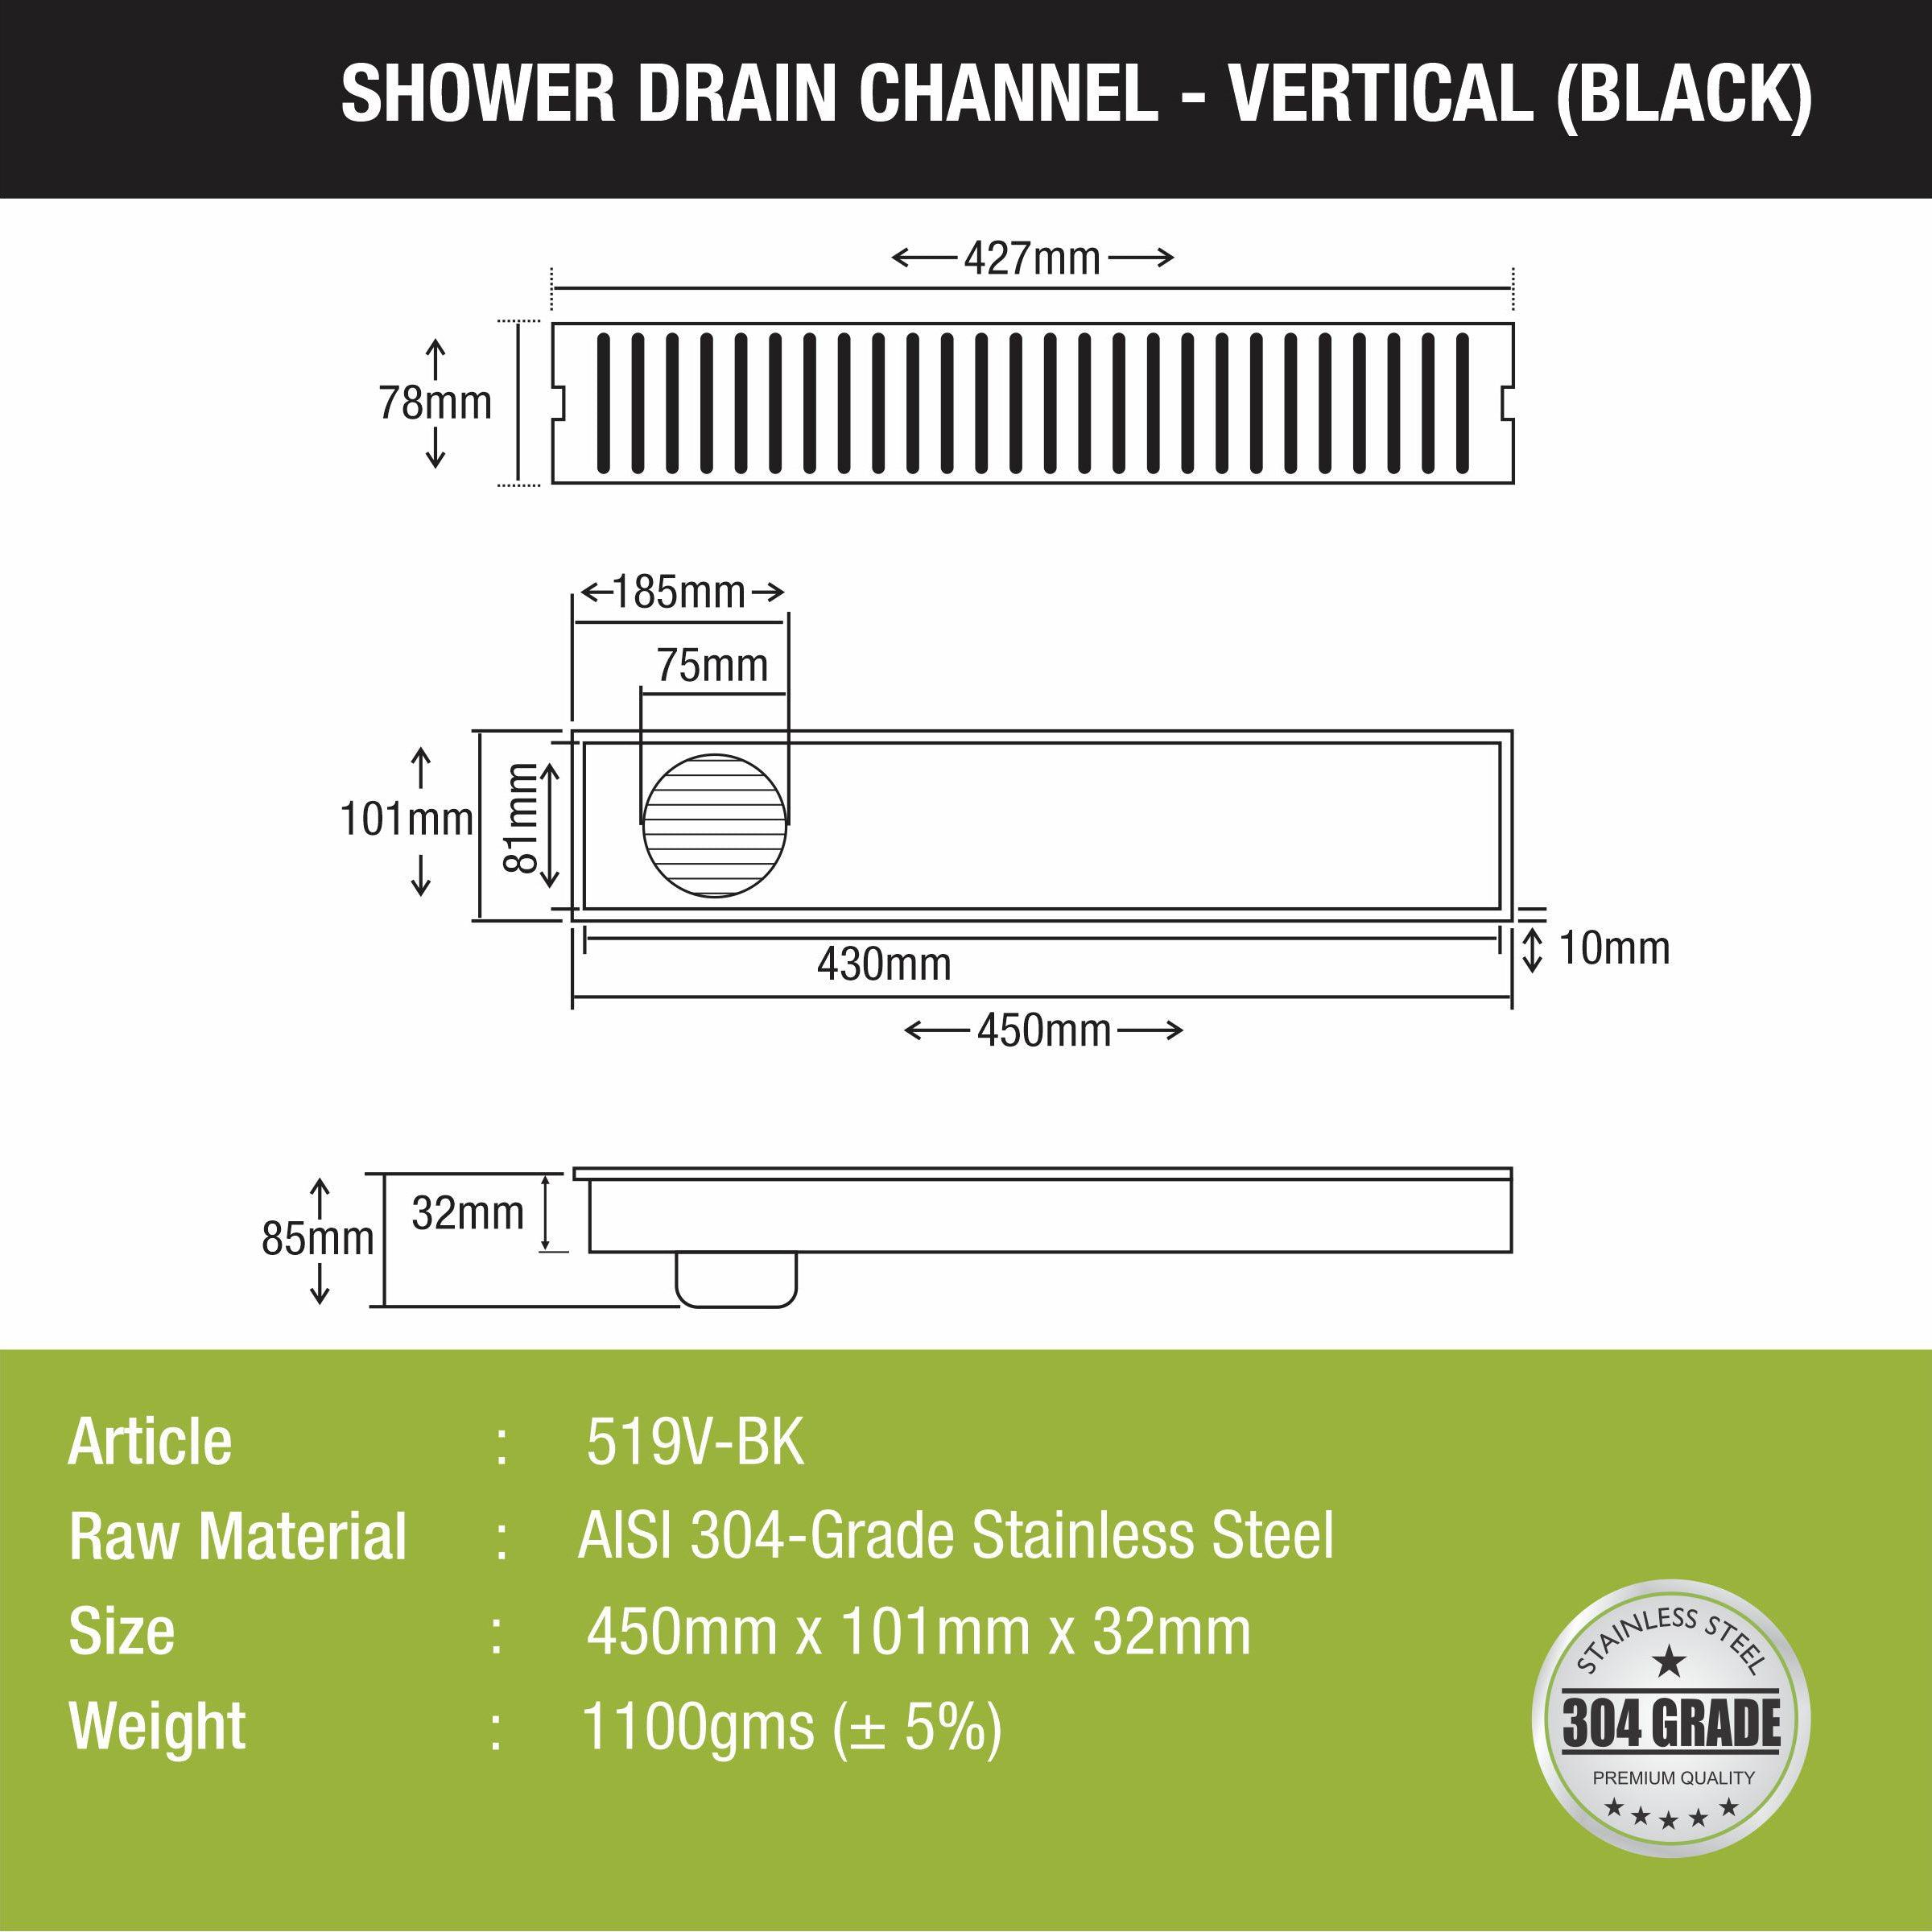 Vertical Shower Drain Channel - Black (18 x 4 Inches) size and mesurement